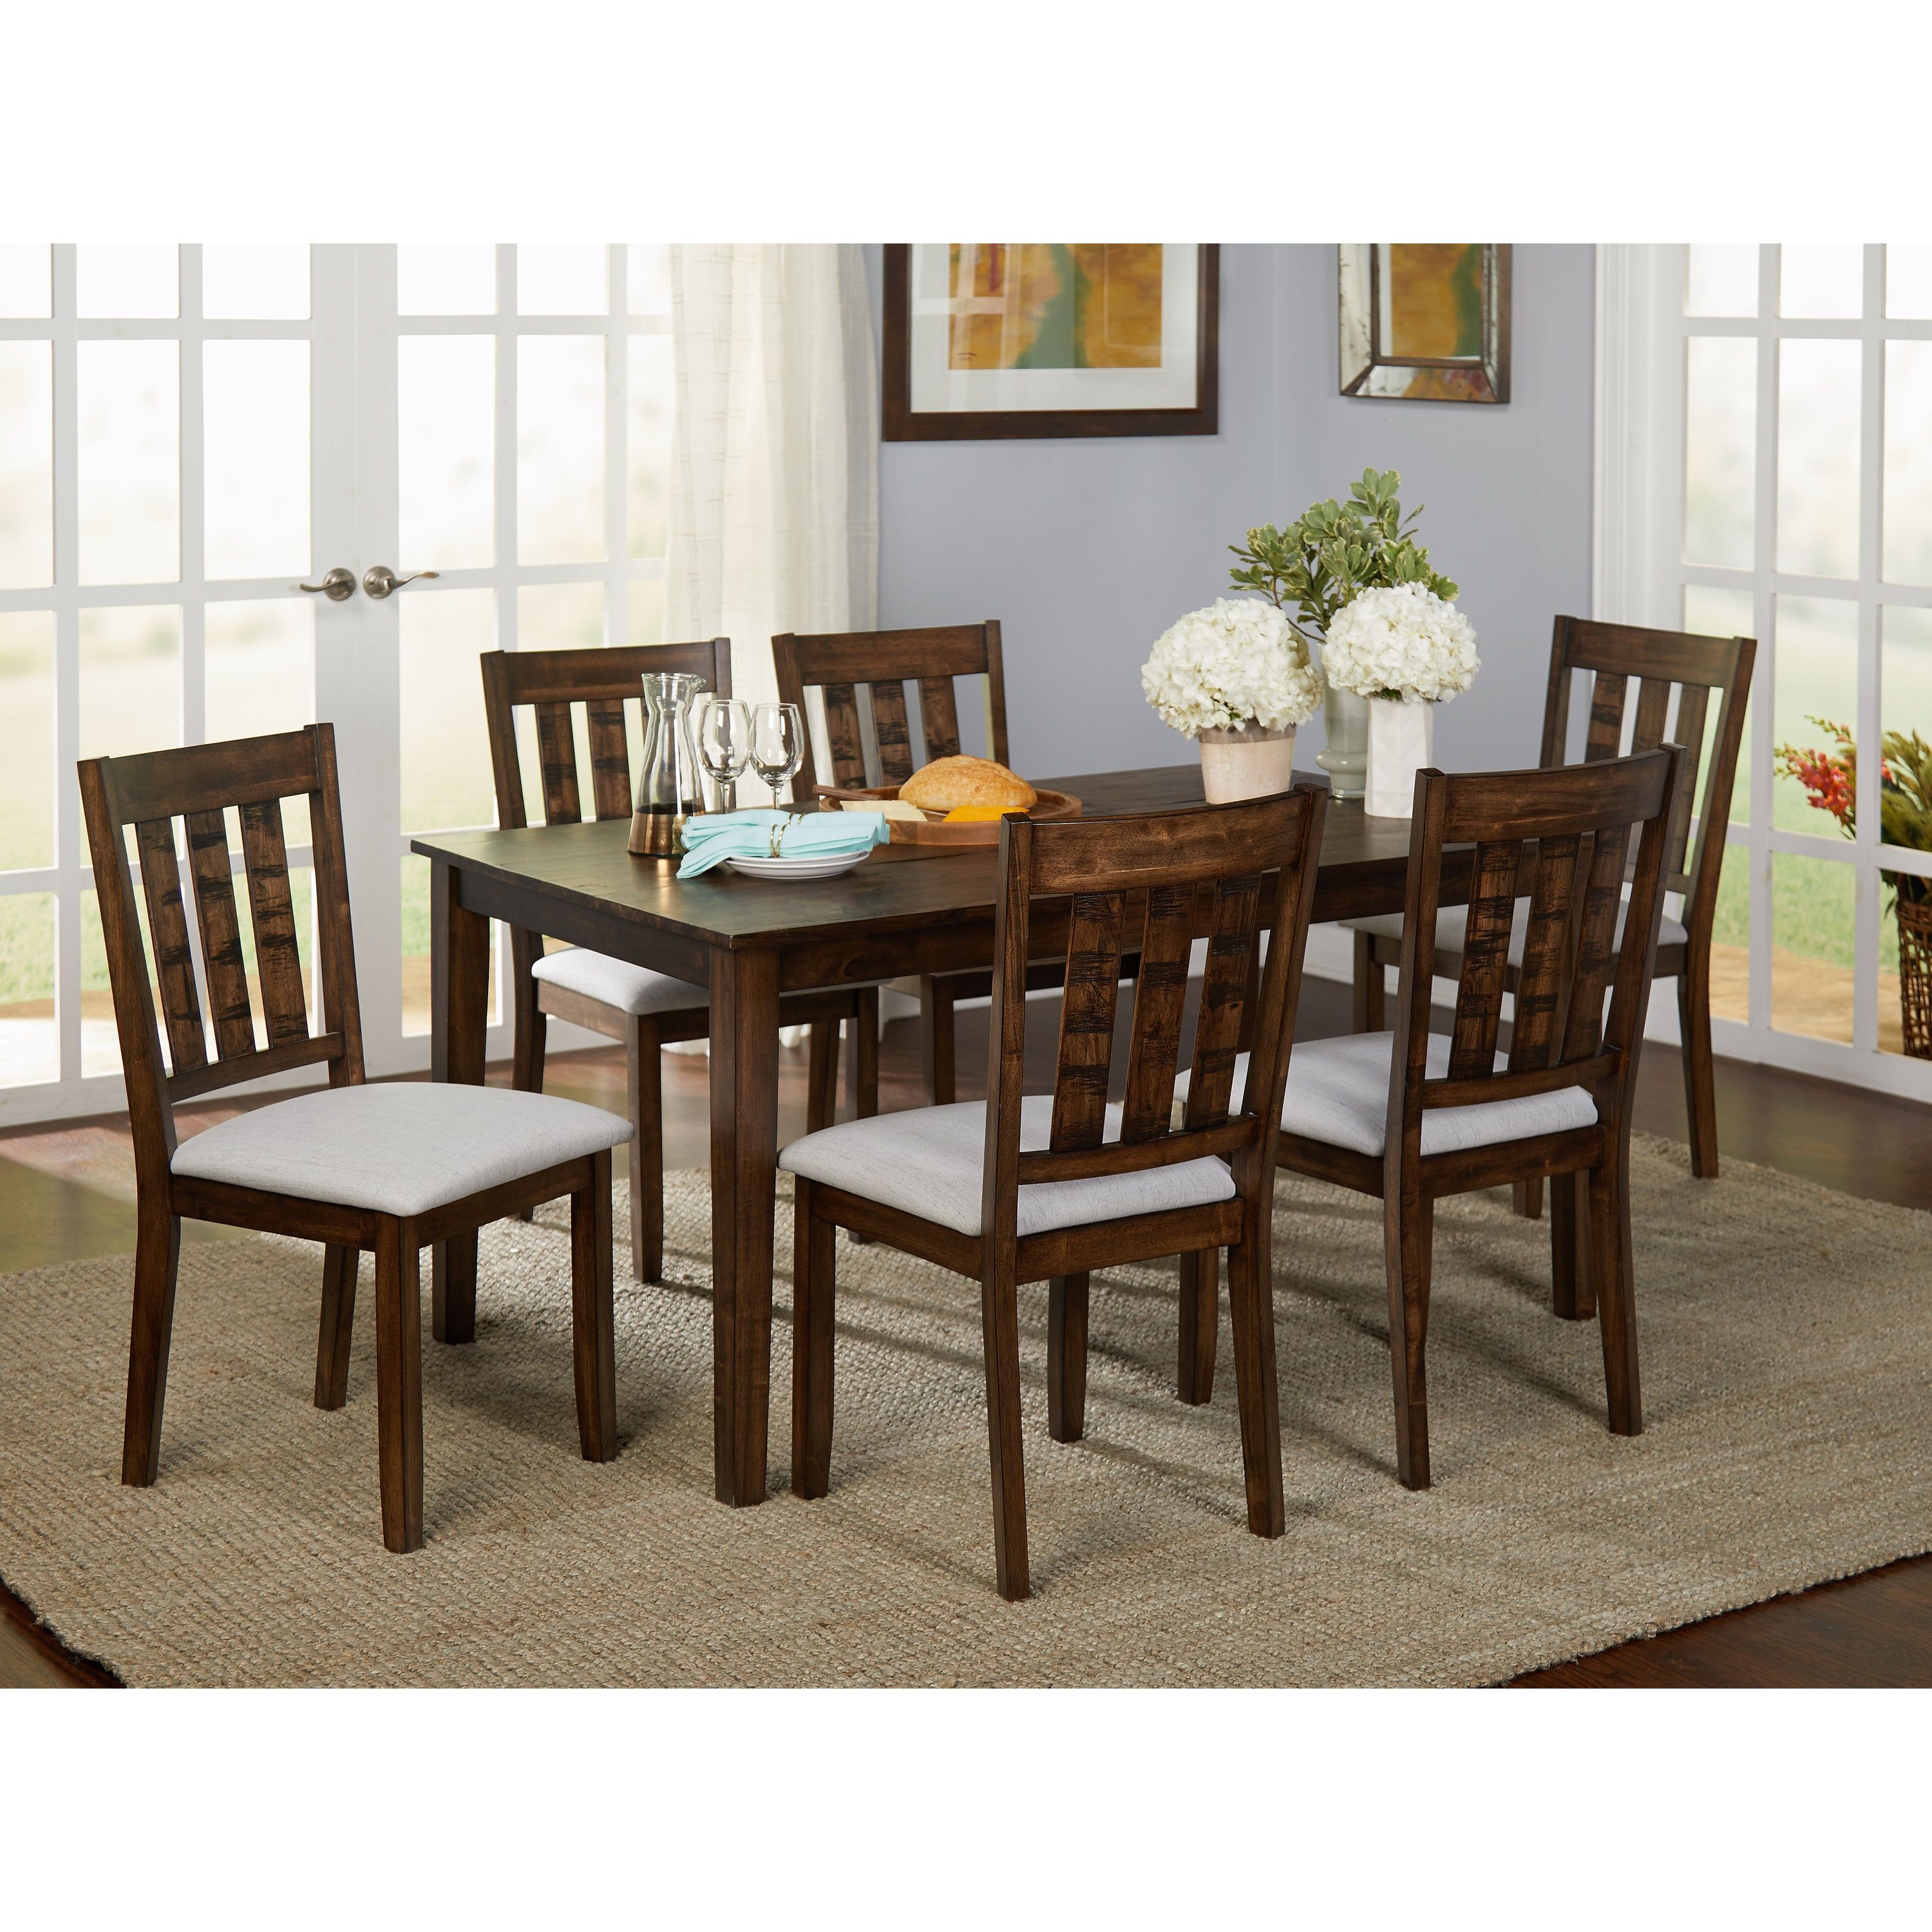 Newest Buy Farmhouse Kitchen & Dining Room Tables Online At Overstock (View 17 of 20)